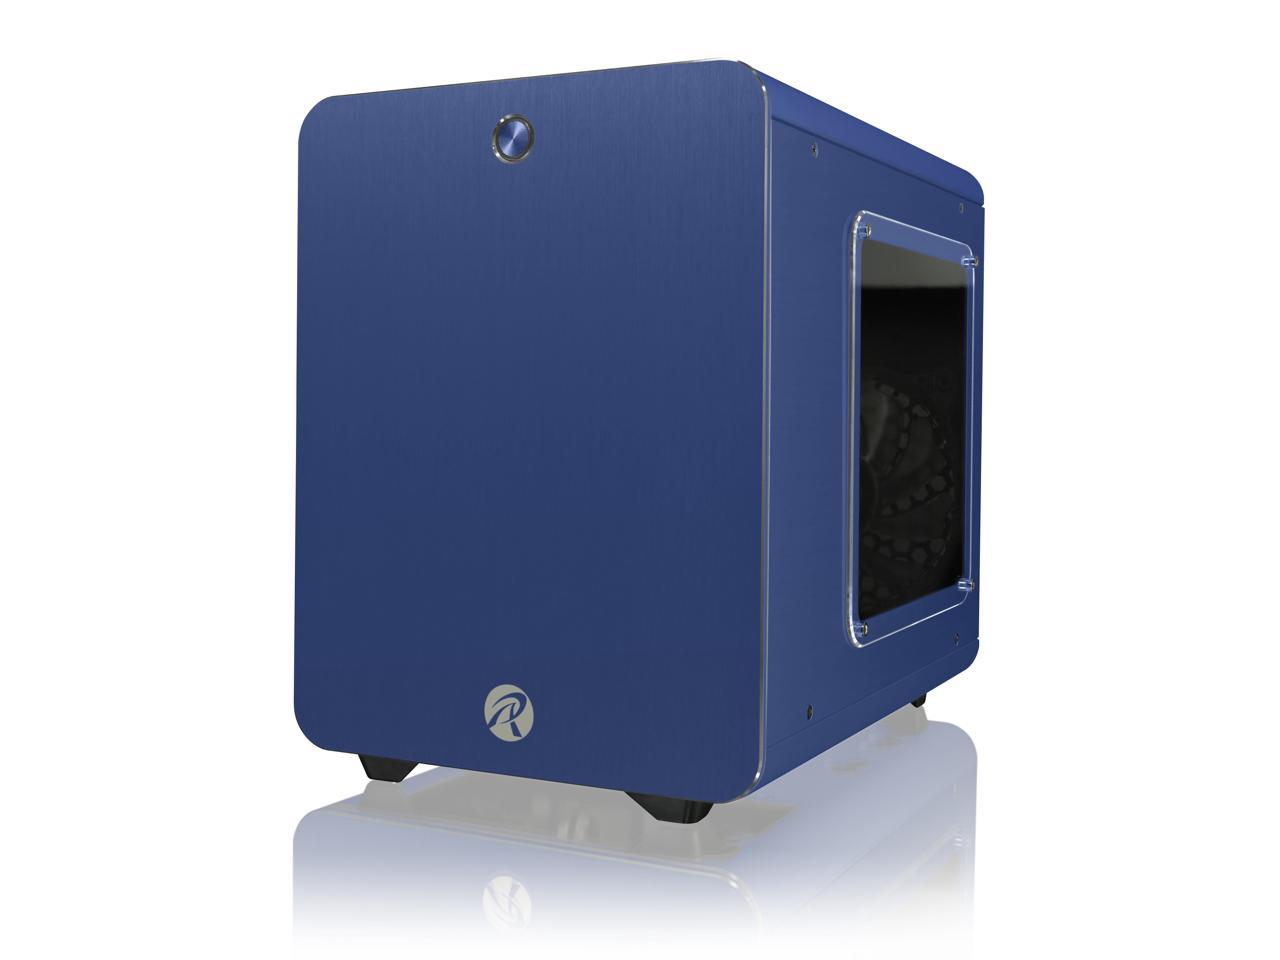 RAIJINTEK METIS PLUS BLUE, a Alu. M-ITX Case, is with one 12025 LED fan at rear, USB 3.0* 2, Ventilate holes at top, Compatible with Standard ATX PSU, 170mm VGA Card length, 160mm CPU Cooler height.